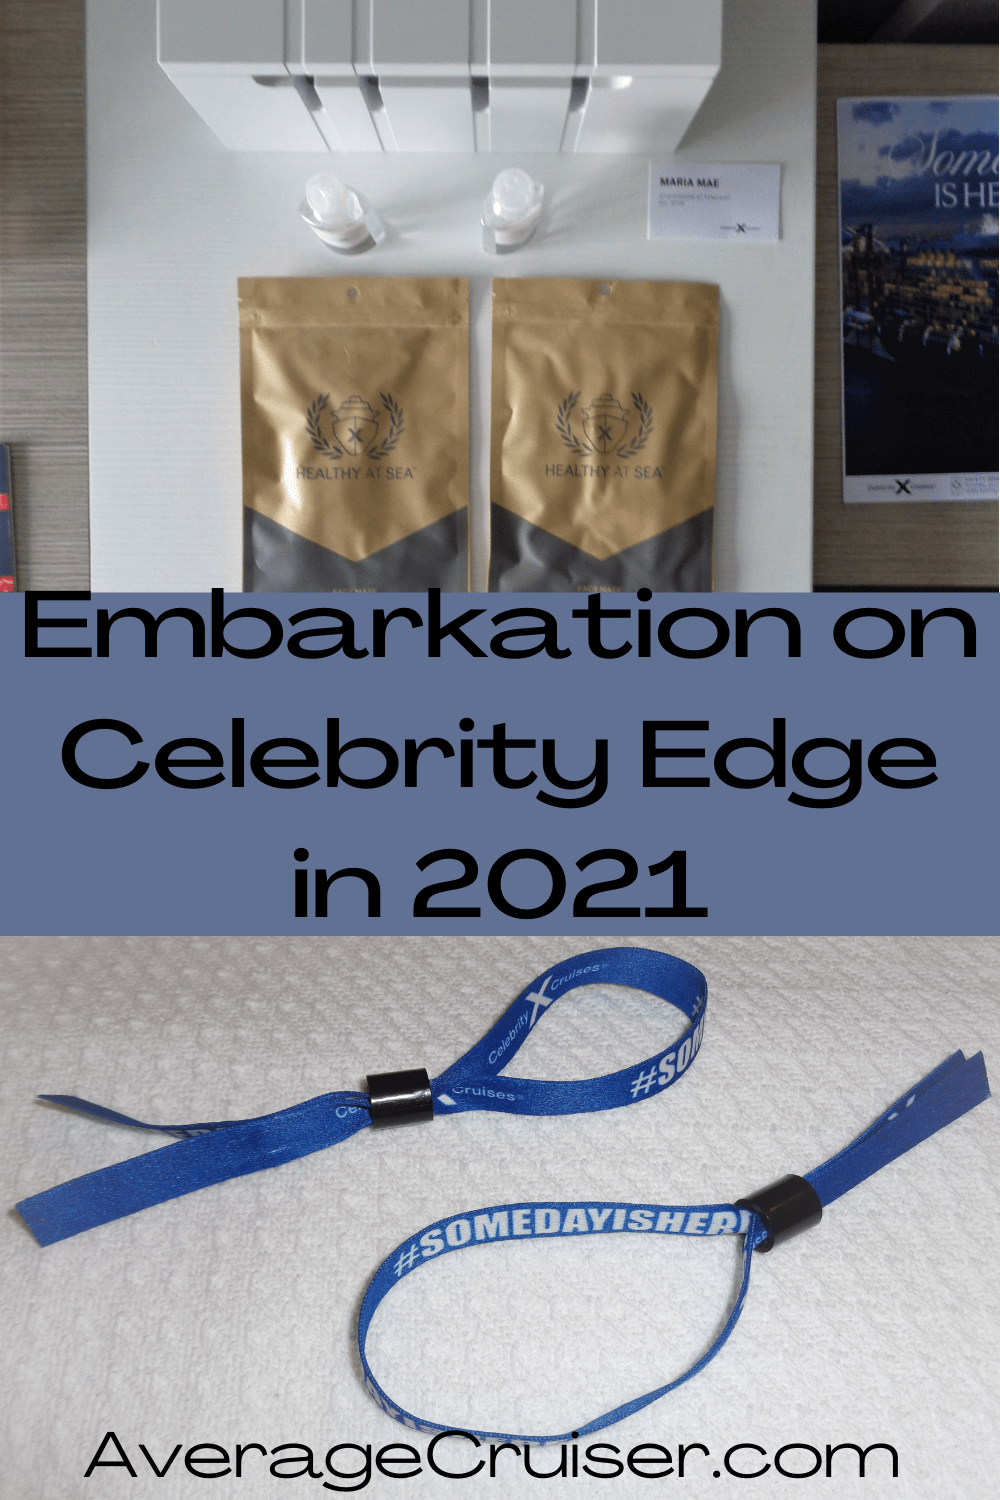 Embarkation on Celebrity Edge in 2021